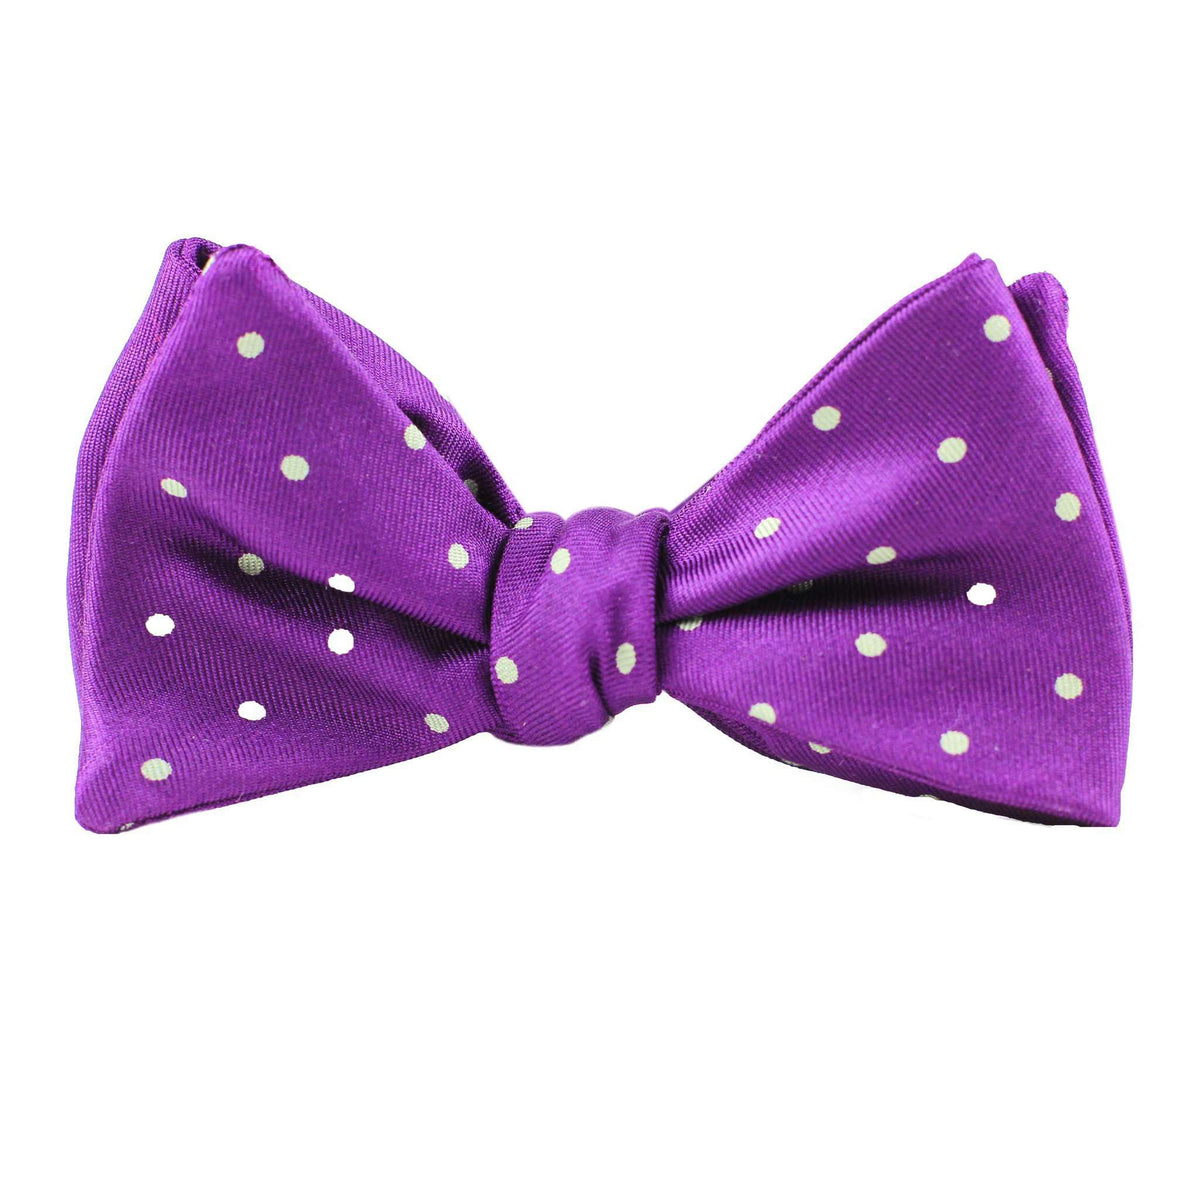 Silk Bow Tie in Purple with White Dots by Res Ipsa - Country Club Prep